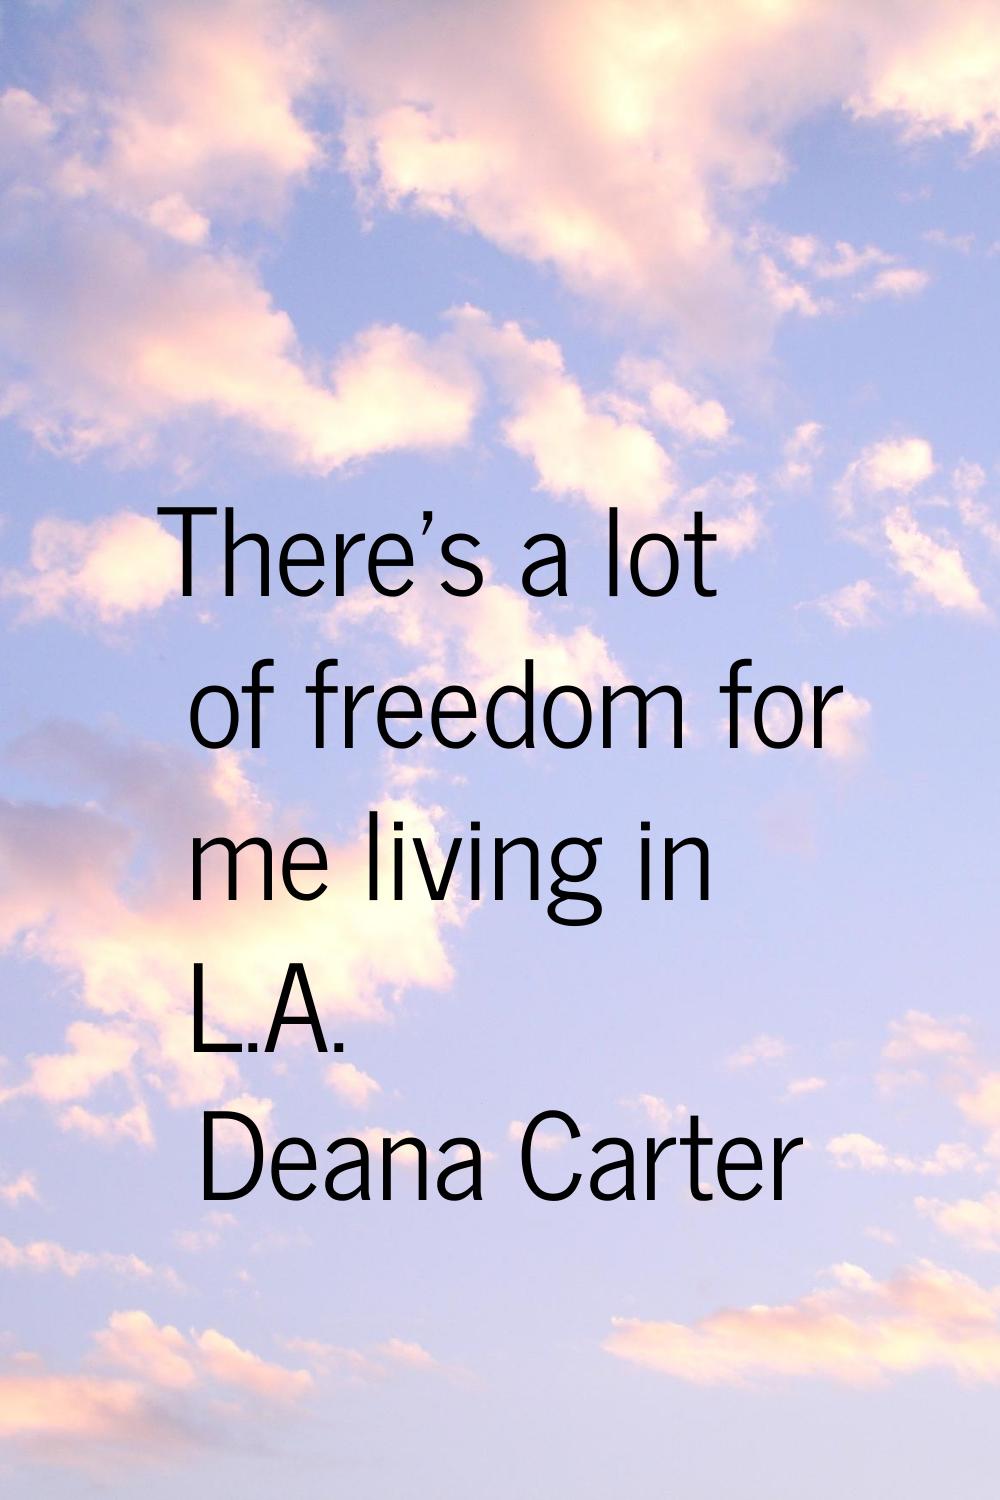 There's a lot of freedom for me living in L.A.